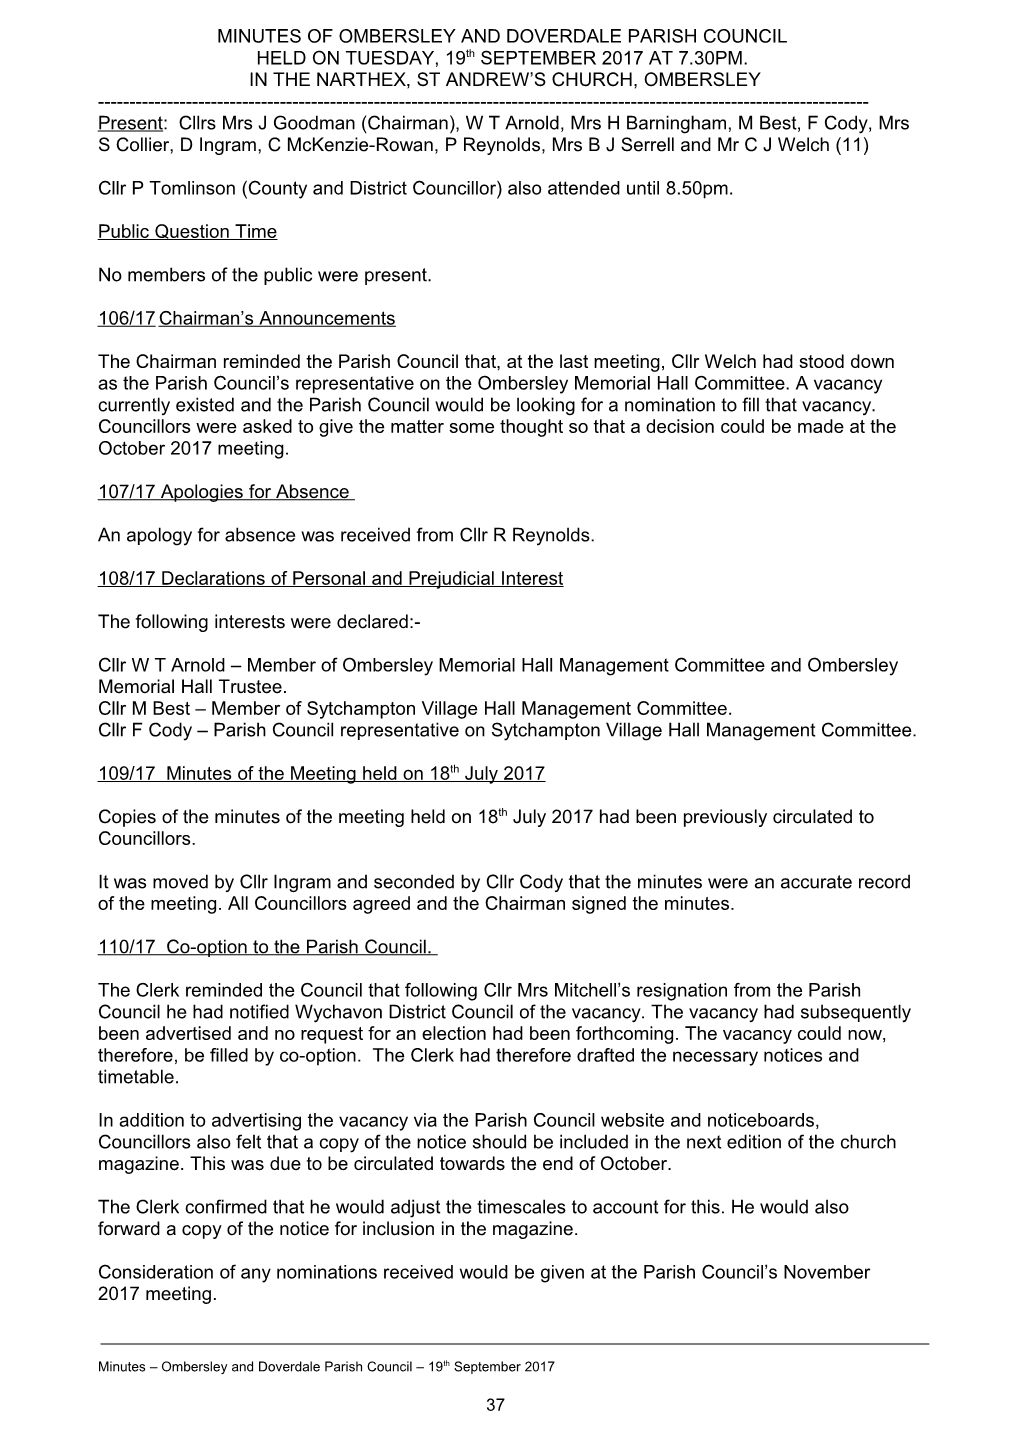 MINUTES of the MEETING of the OMBERSLEY and DOVERDALE PARISH COUNCIL HELD on TUESDAY, 16Th